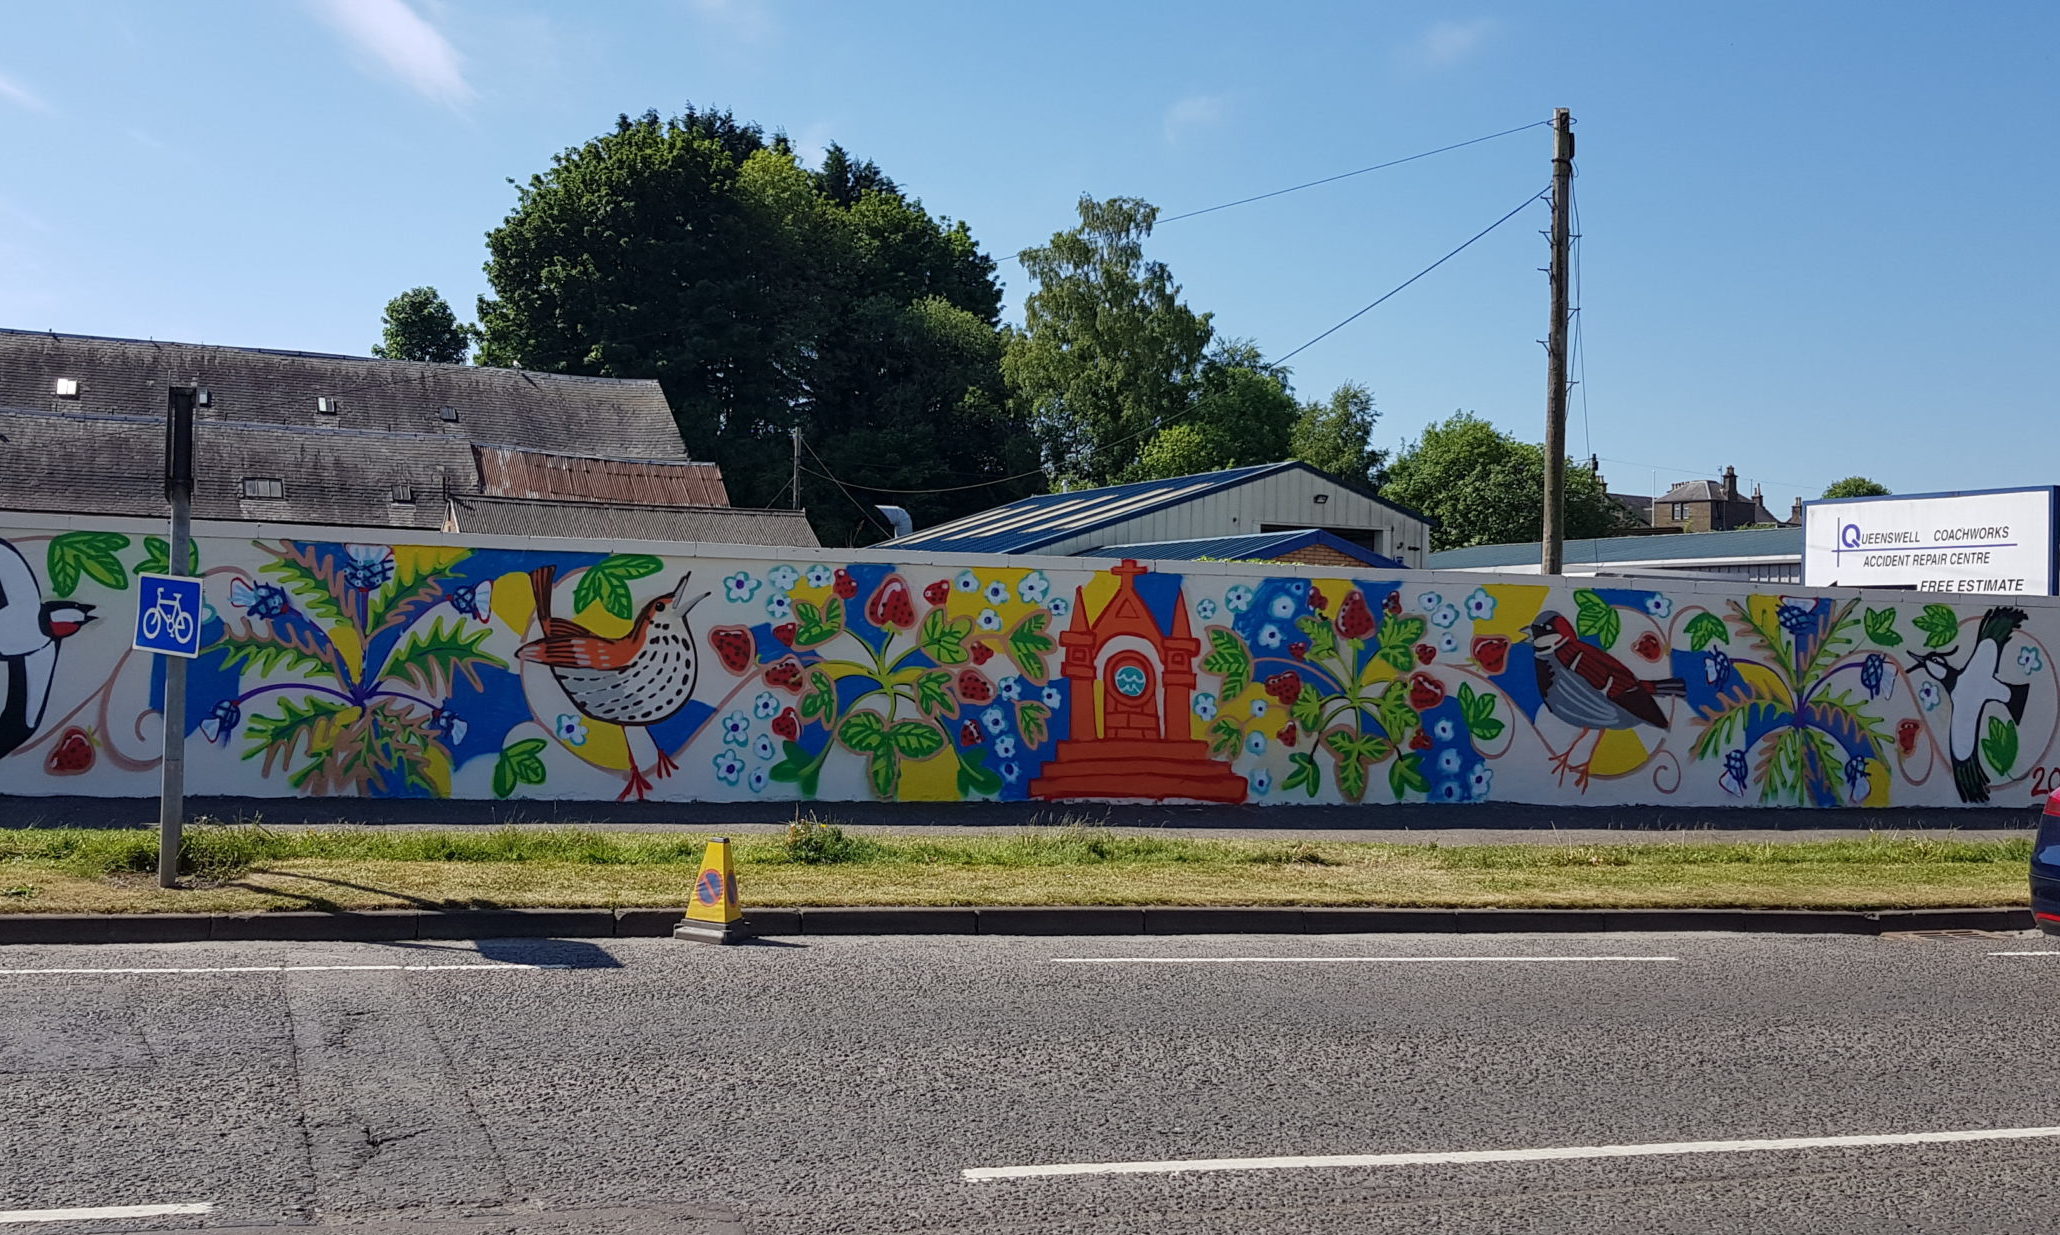 The wall mural on Queenswell Road.